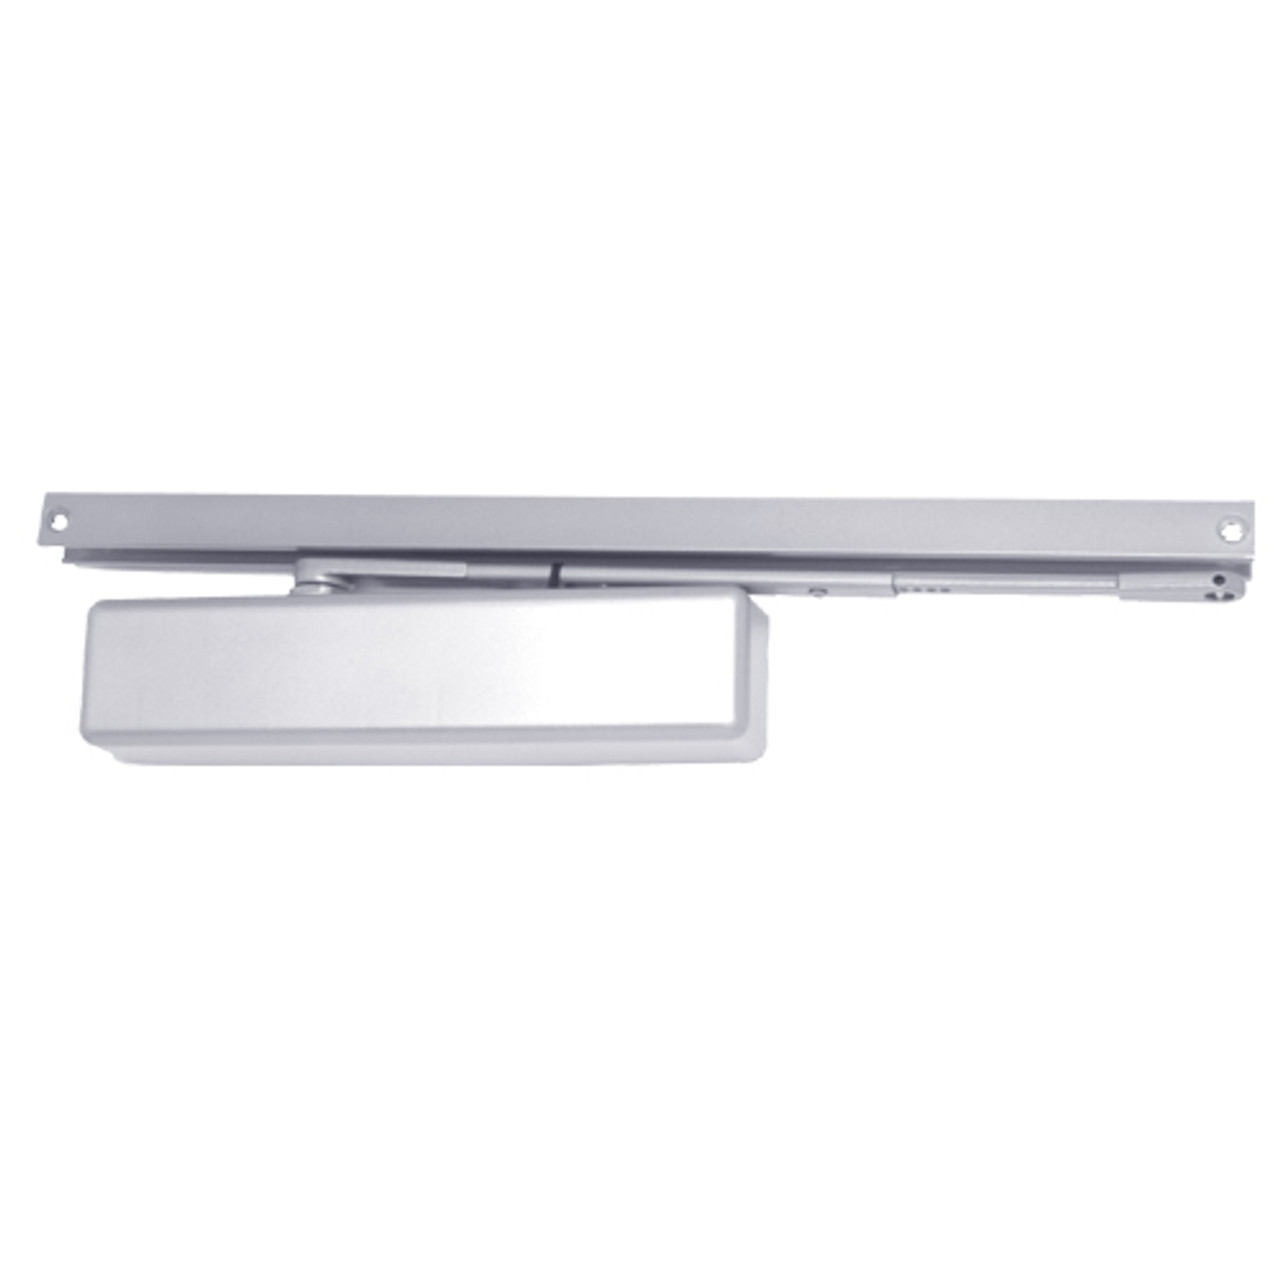 1460T-BUMPER-US26 LCN Surface Mount Door Closer with Bumper Arm in Bright Chrome Finish